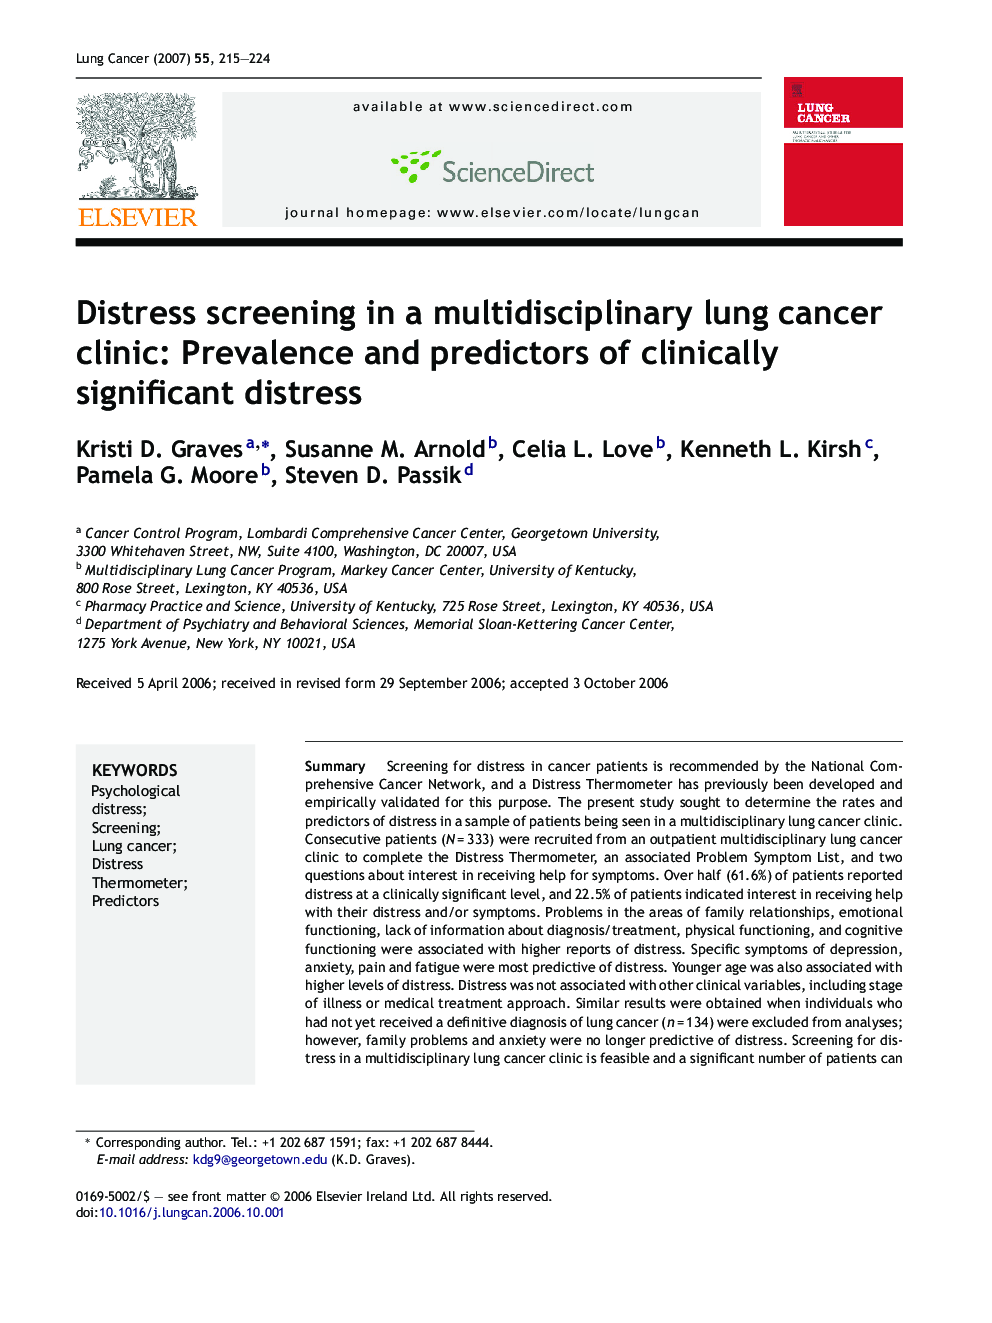 Distress screening in a multidisciplinary lung cancer clinic: Prevalence and predictors of clinically significant distress